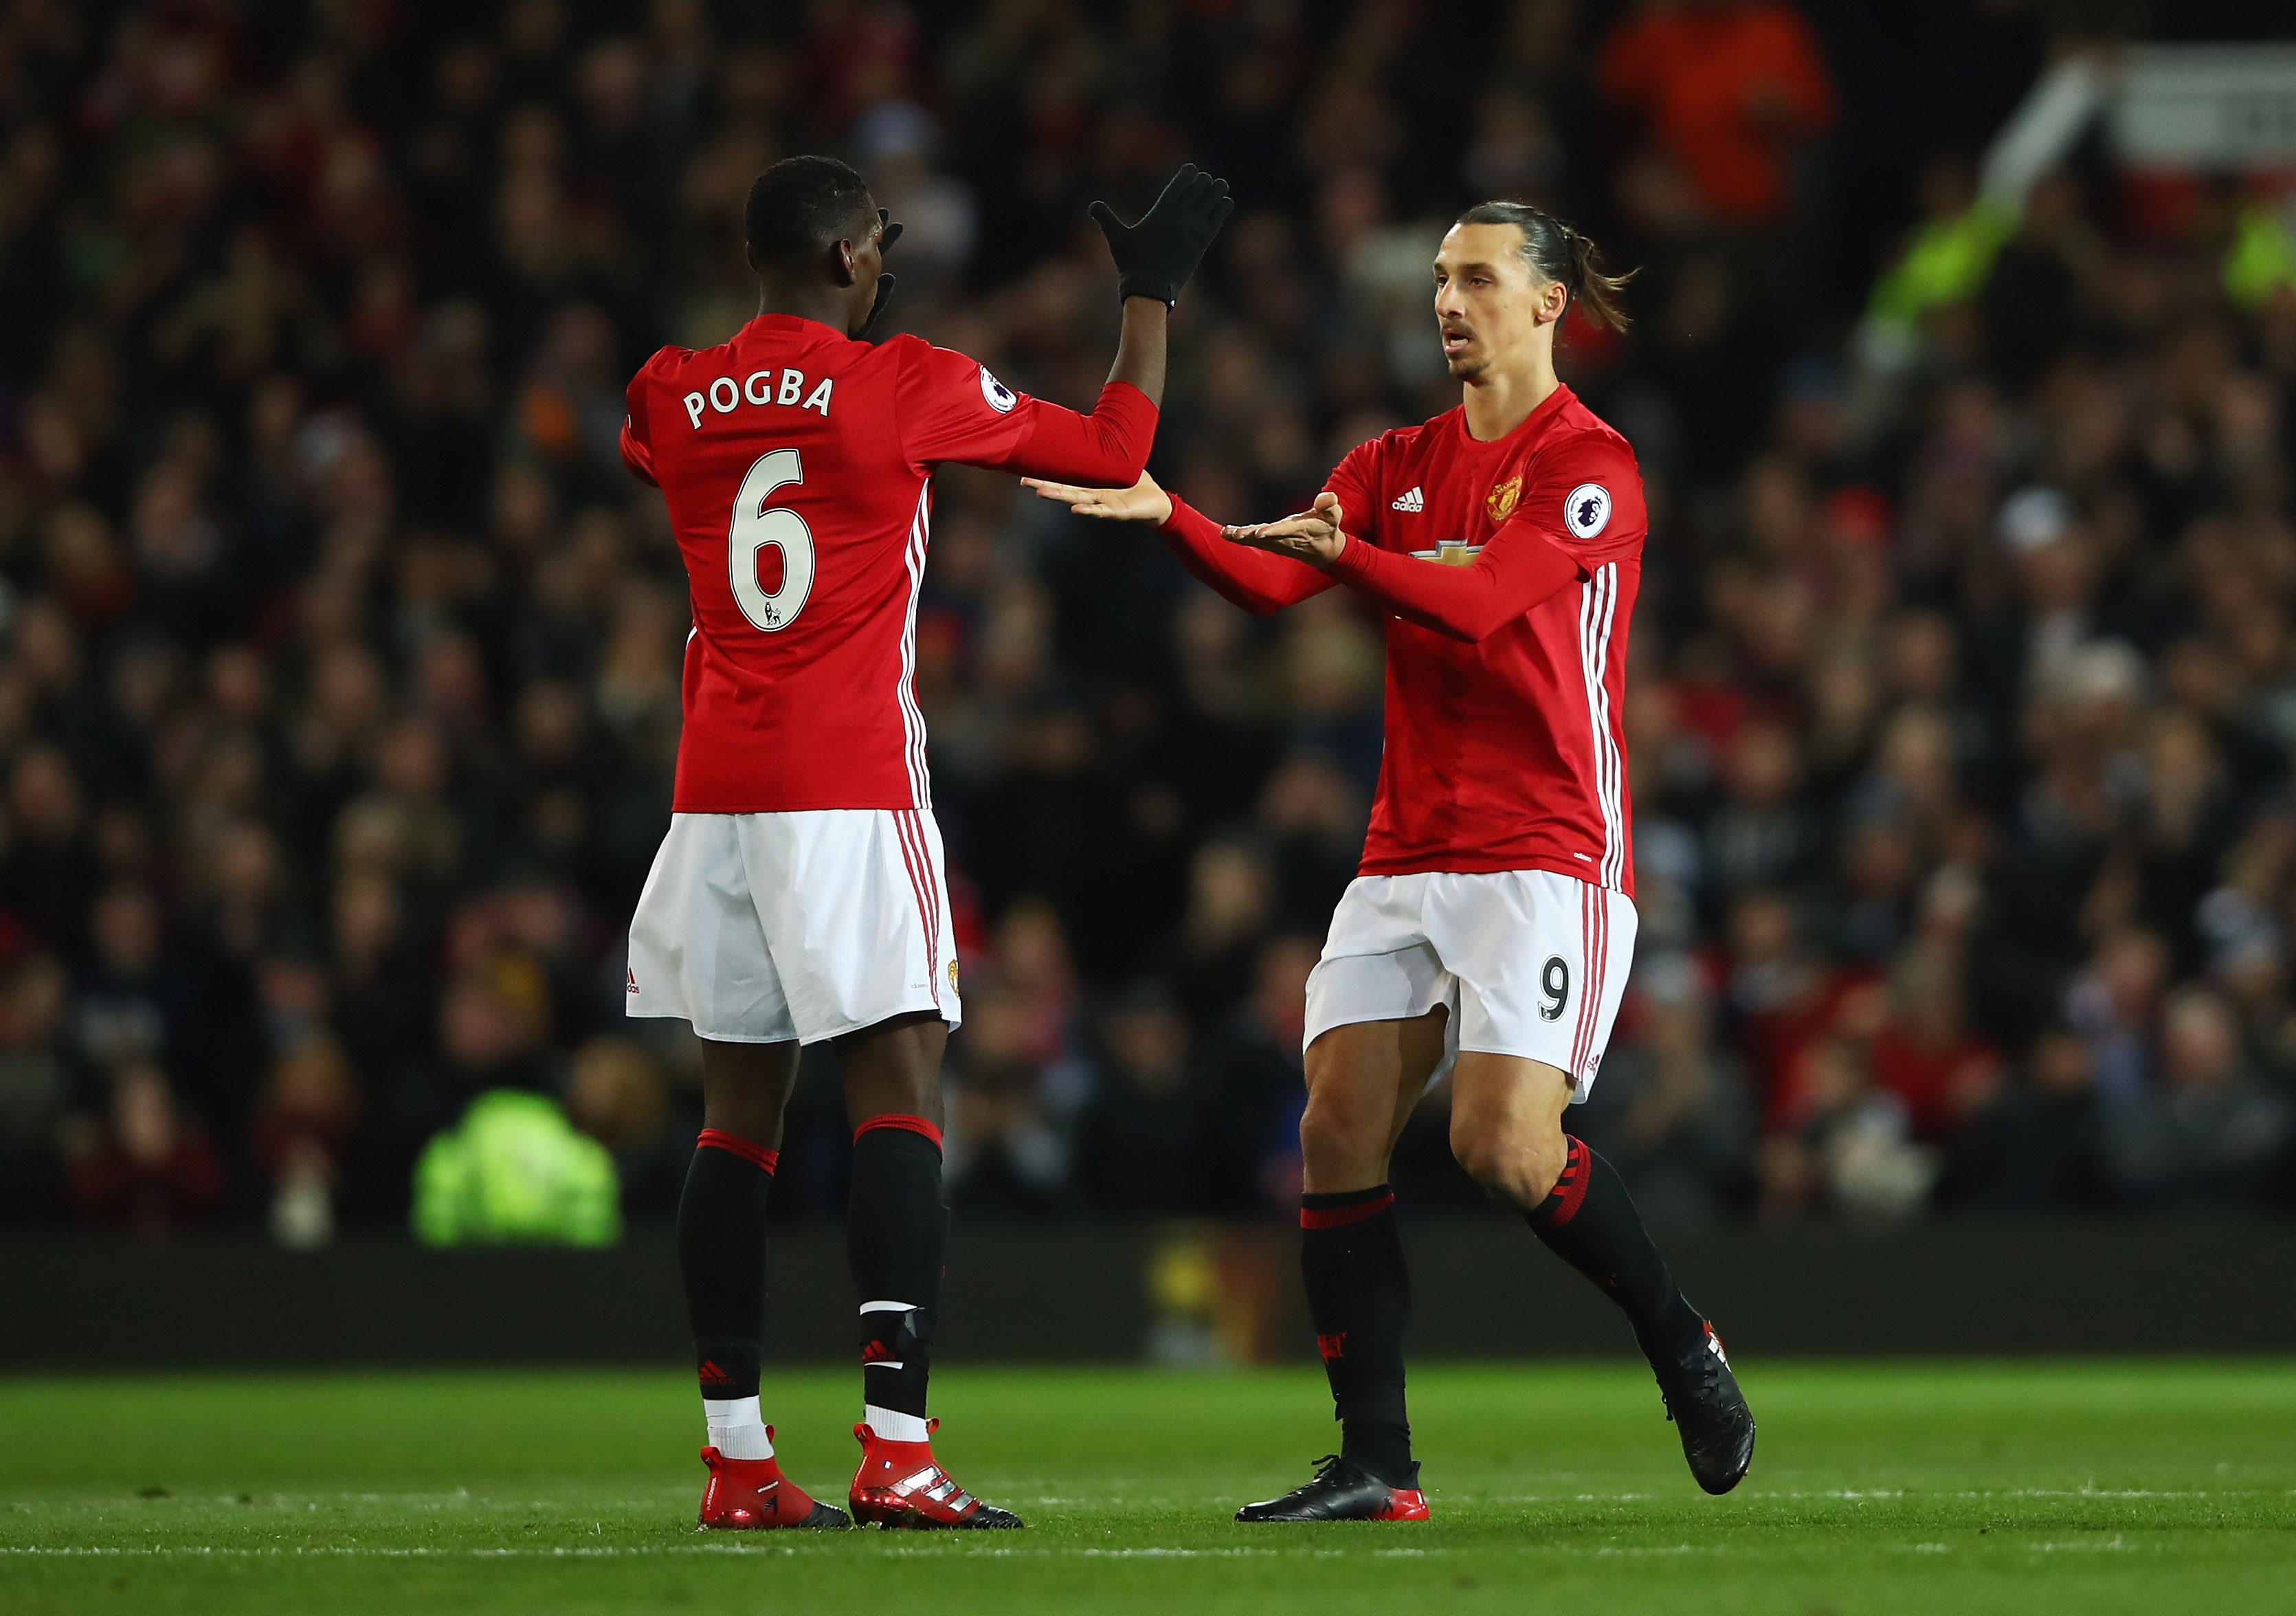 MANCHESTER, ENGLAND - NOVEMBER 27: Zlatan Ibrahimovic of Manchester United (R) celebrates scoring his sides first goal with Paul Pogba of Manchester United (L) during the Premier League match between Manchester United and West Ham United at Old Trafford on November 27, 2016 in Manchester, England.  (Photo by Clive Brunskill/Getty Images)